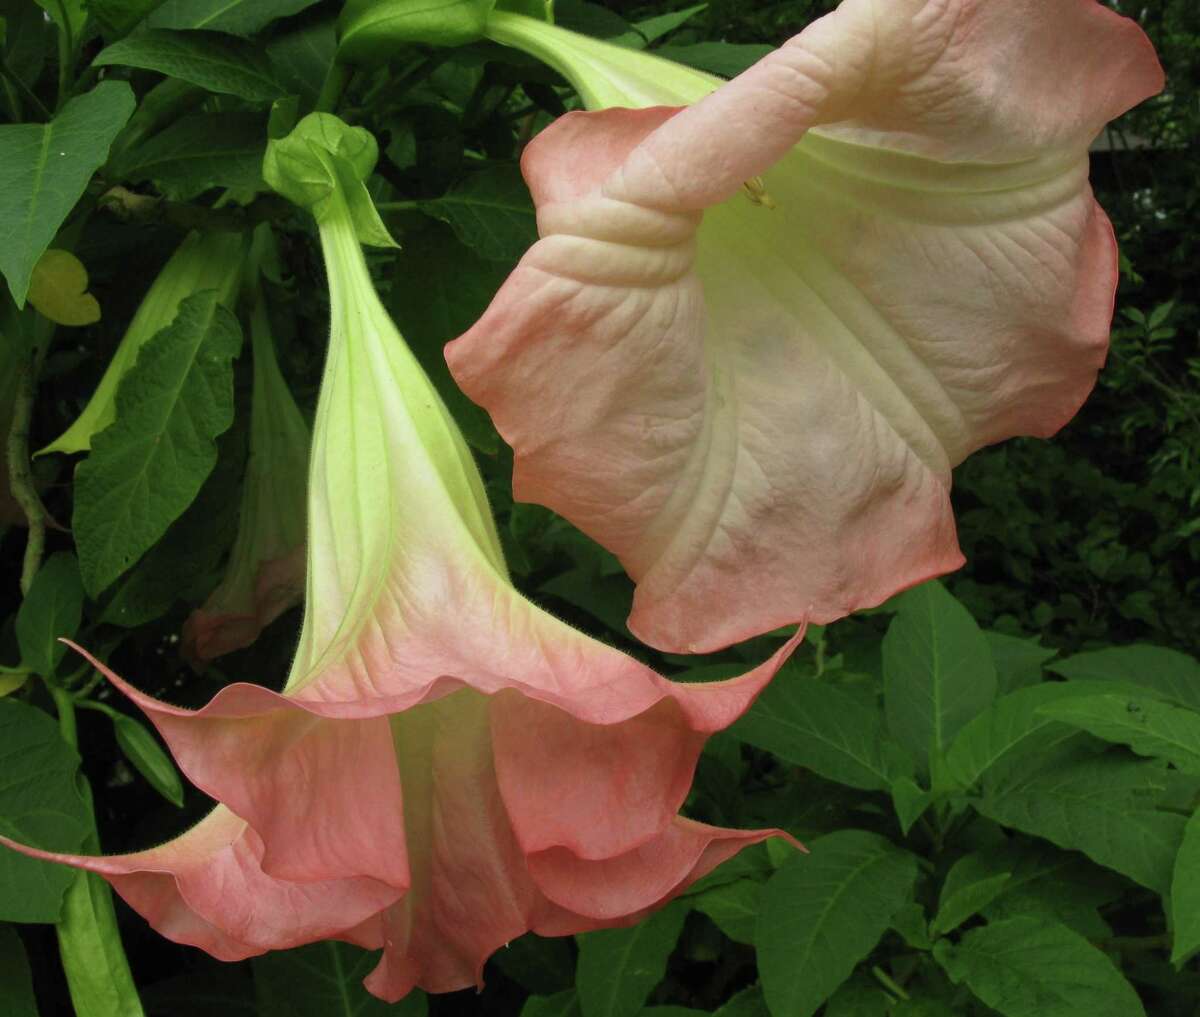 Angel’s Trumpet blooms in the evening.